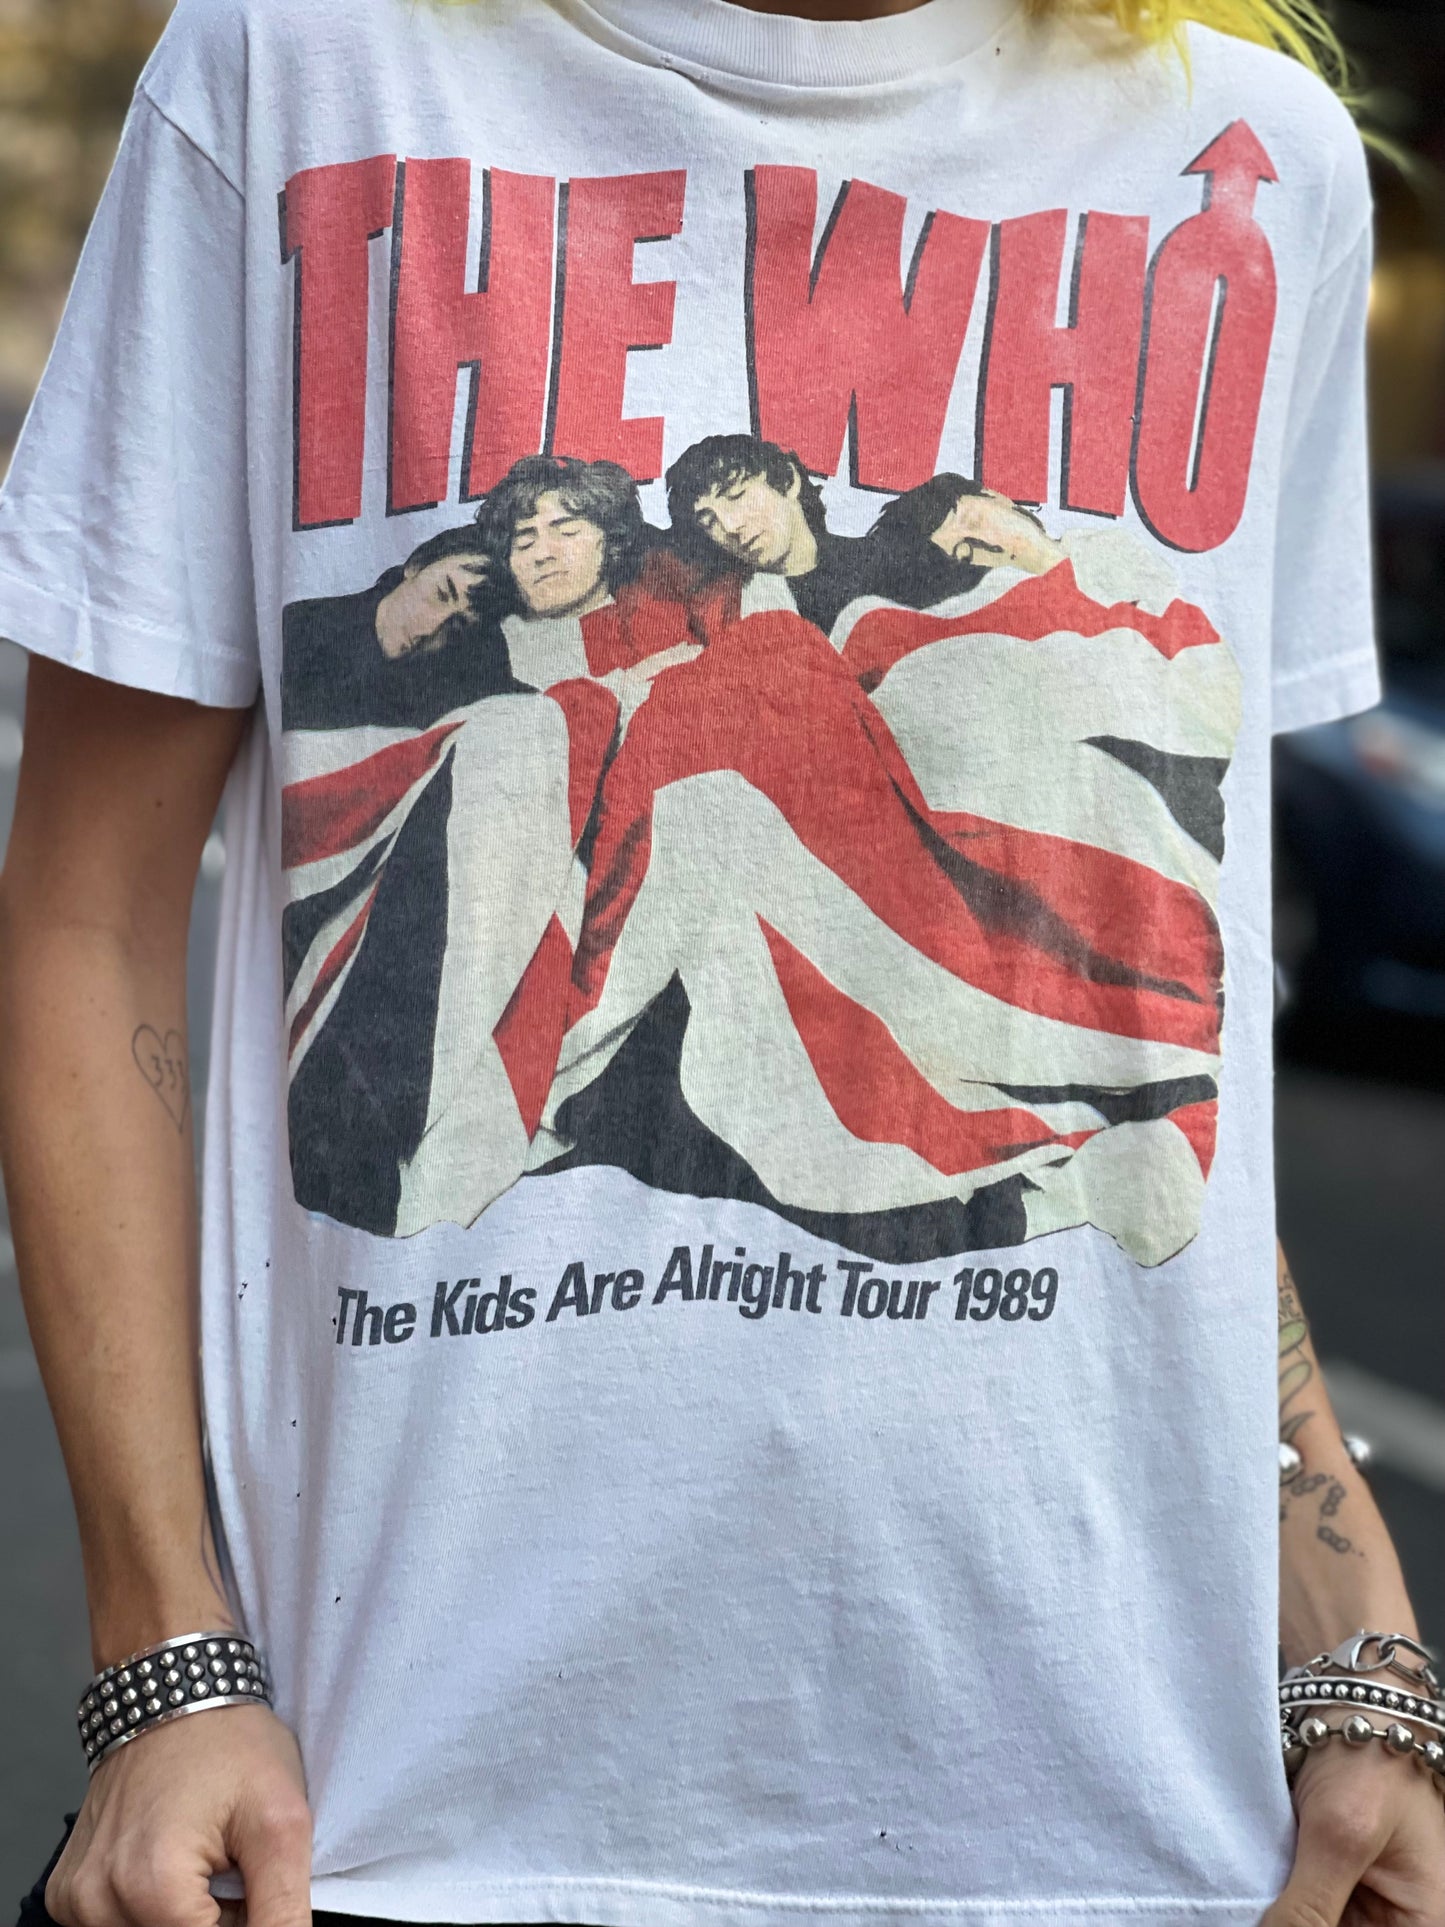 Vintage British Rock Band The WHO T-shirt - Spark Pretty